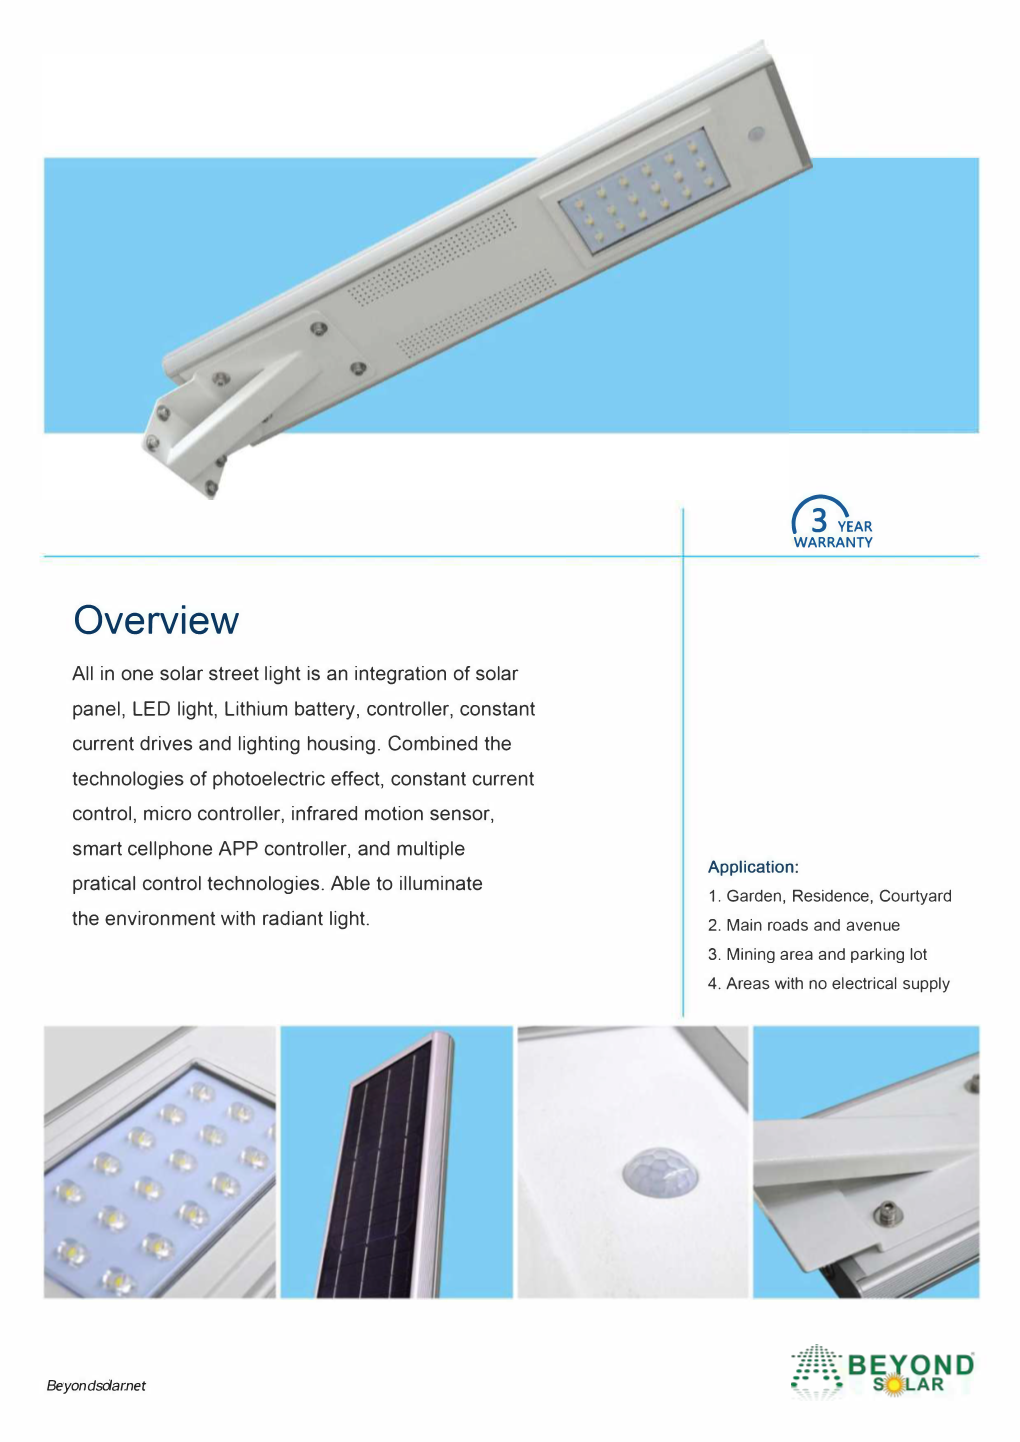 Overview All in One Solar Street Light Is an Integration of Solar Panel, LED Light, Lithium Battery, Controller, Constant Current Drives and Lighting Housing